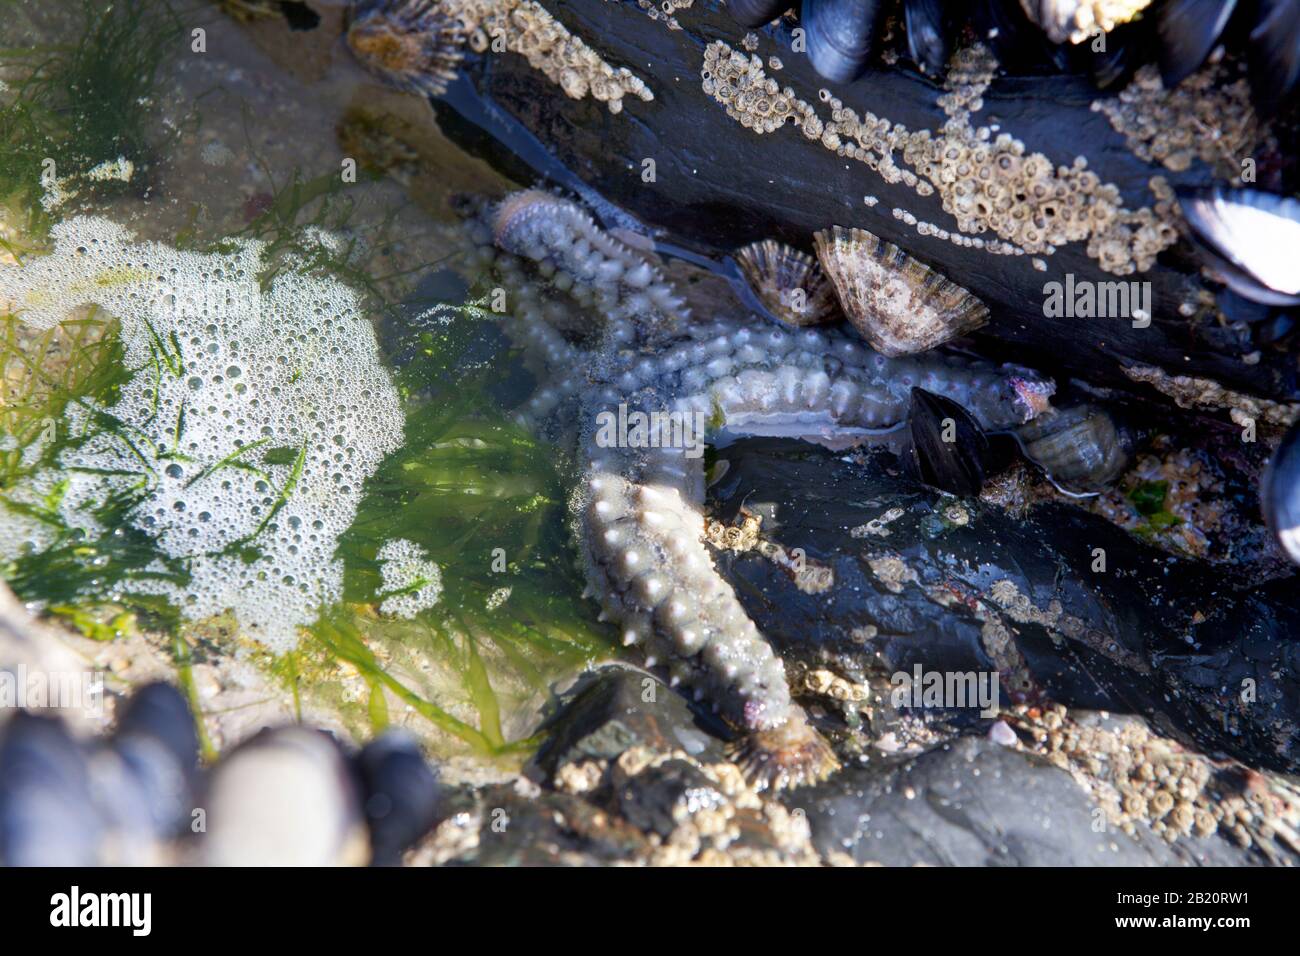 Low tide exposes a rockpool containing a starfish (sea star) at Harlyn Bay beach in North Cornwall, UK. Stock Photo